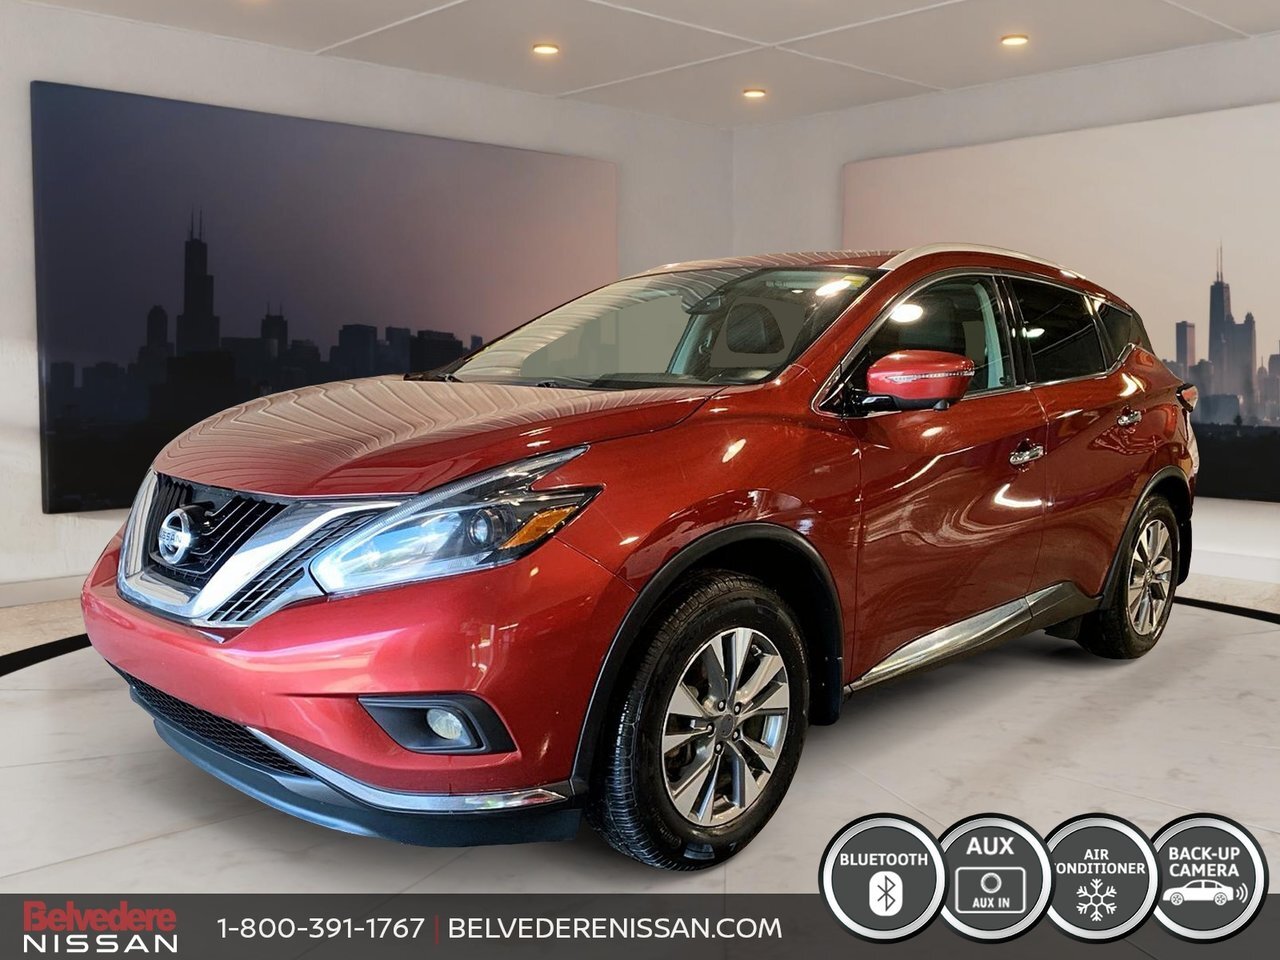 2018 Nissan Murano SL AWD NAVIGATION CUIR TOIT/PANO CAM/360 1 OWNER /